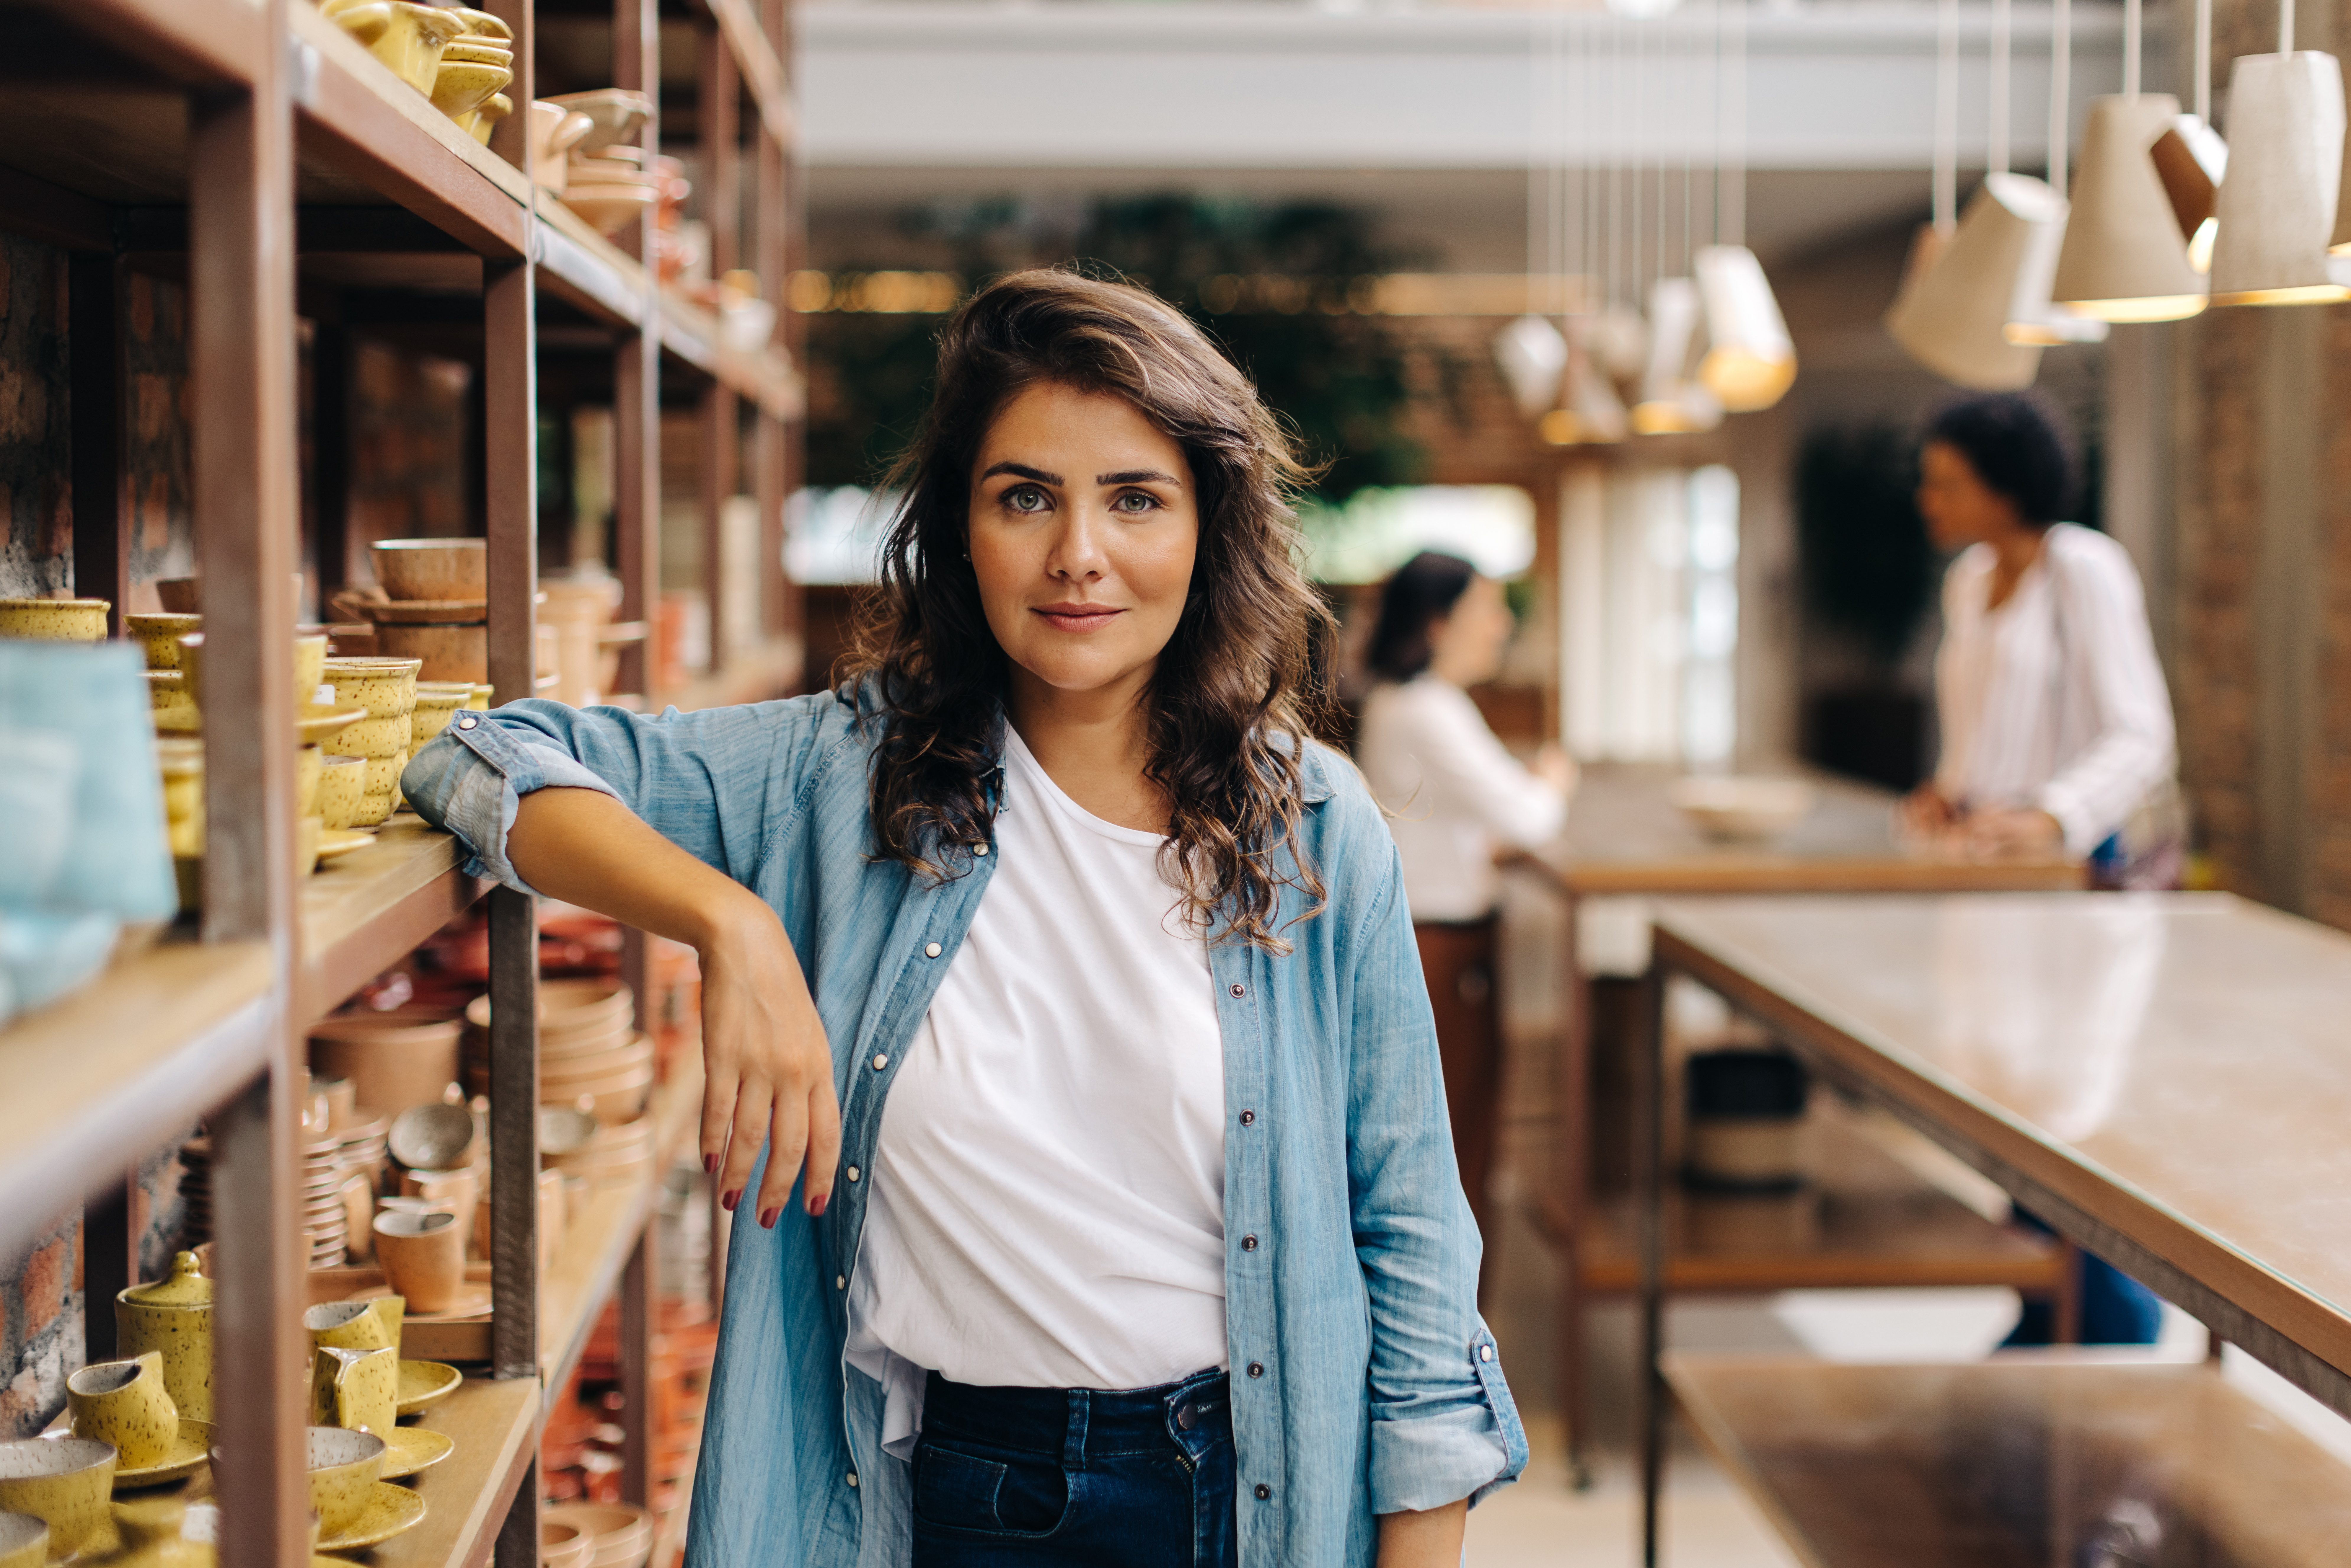 Best Practices for Finding Diverse Suppliers Confident young woman looking at the camera in her ceramic store. Female ceramist managing a store with handmade earthenware products. Creative young businesswoman running a small business.